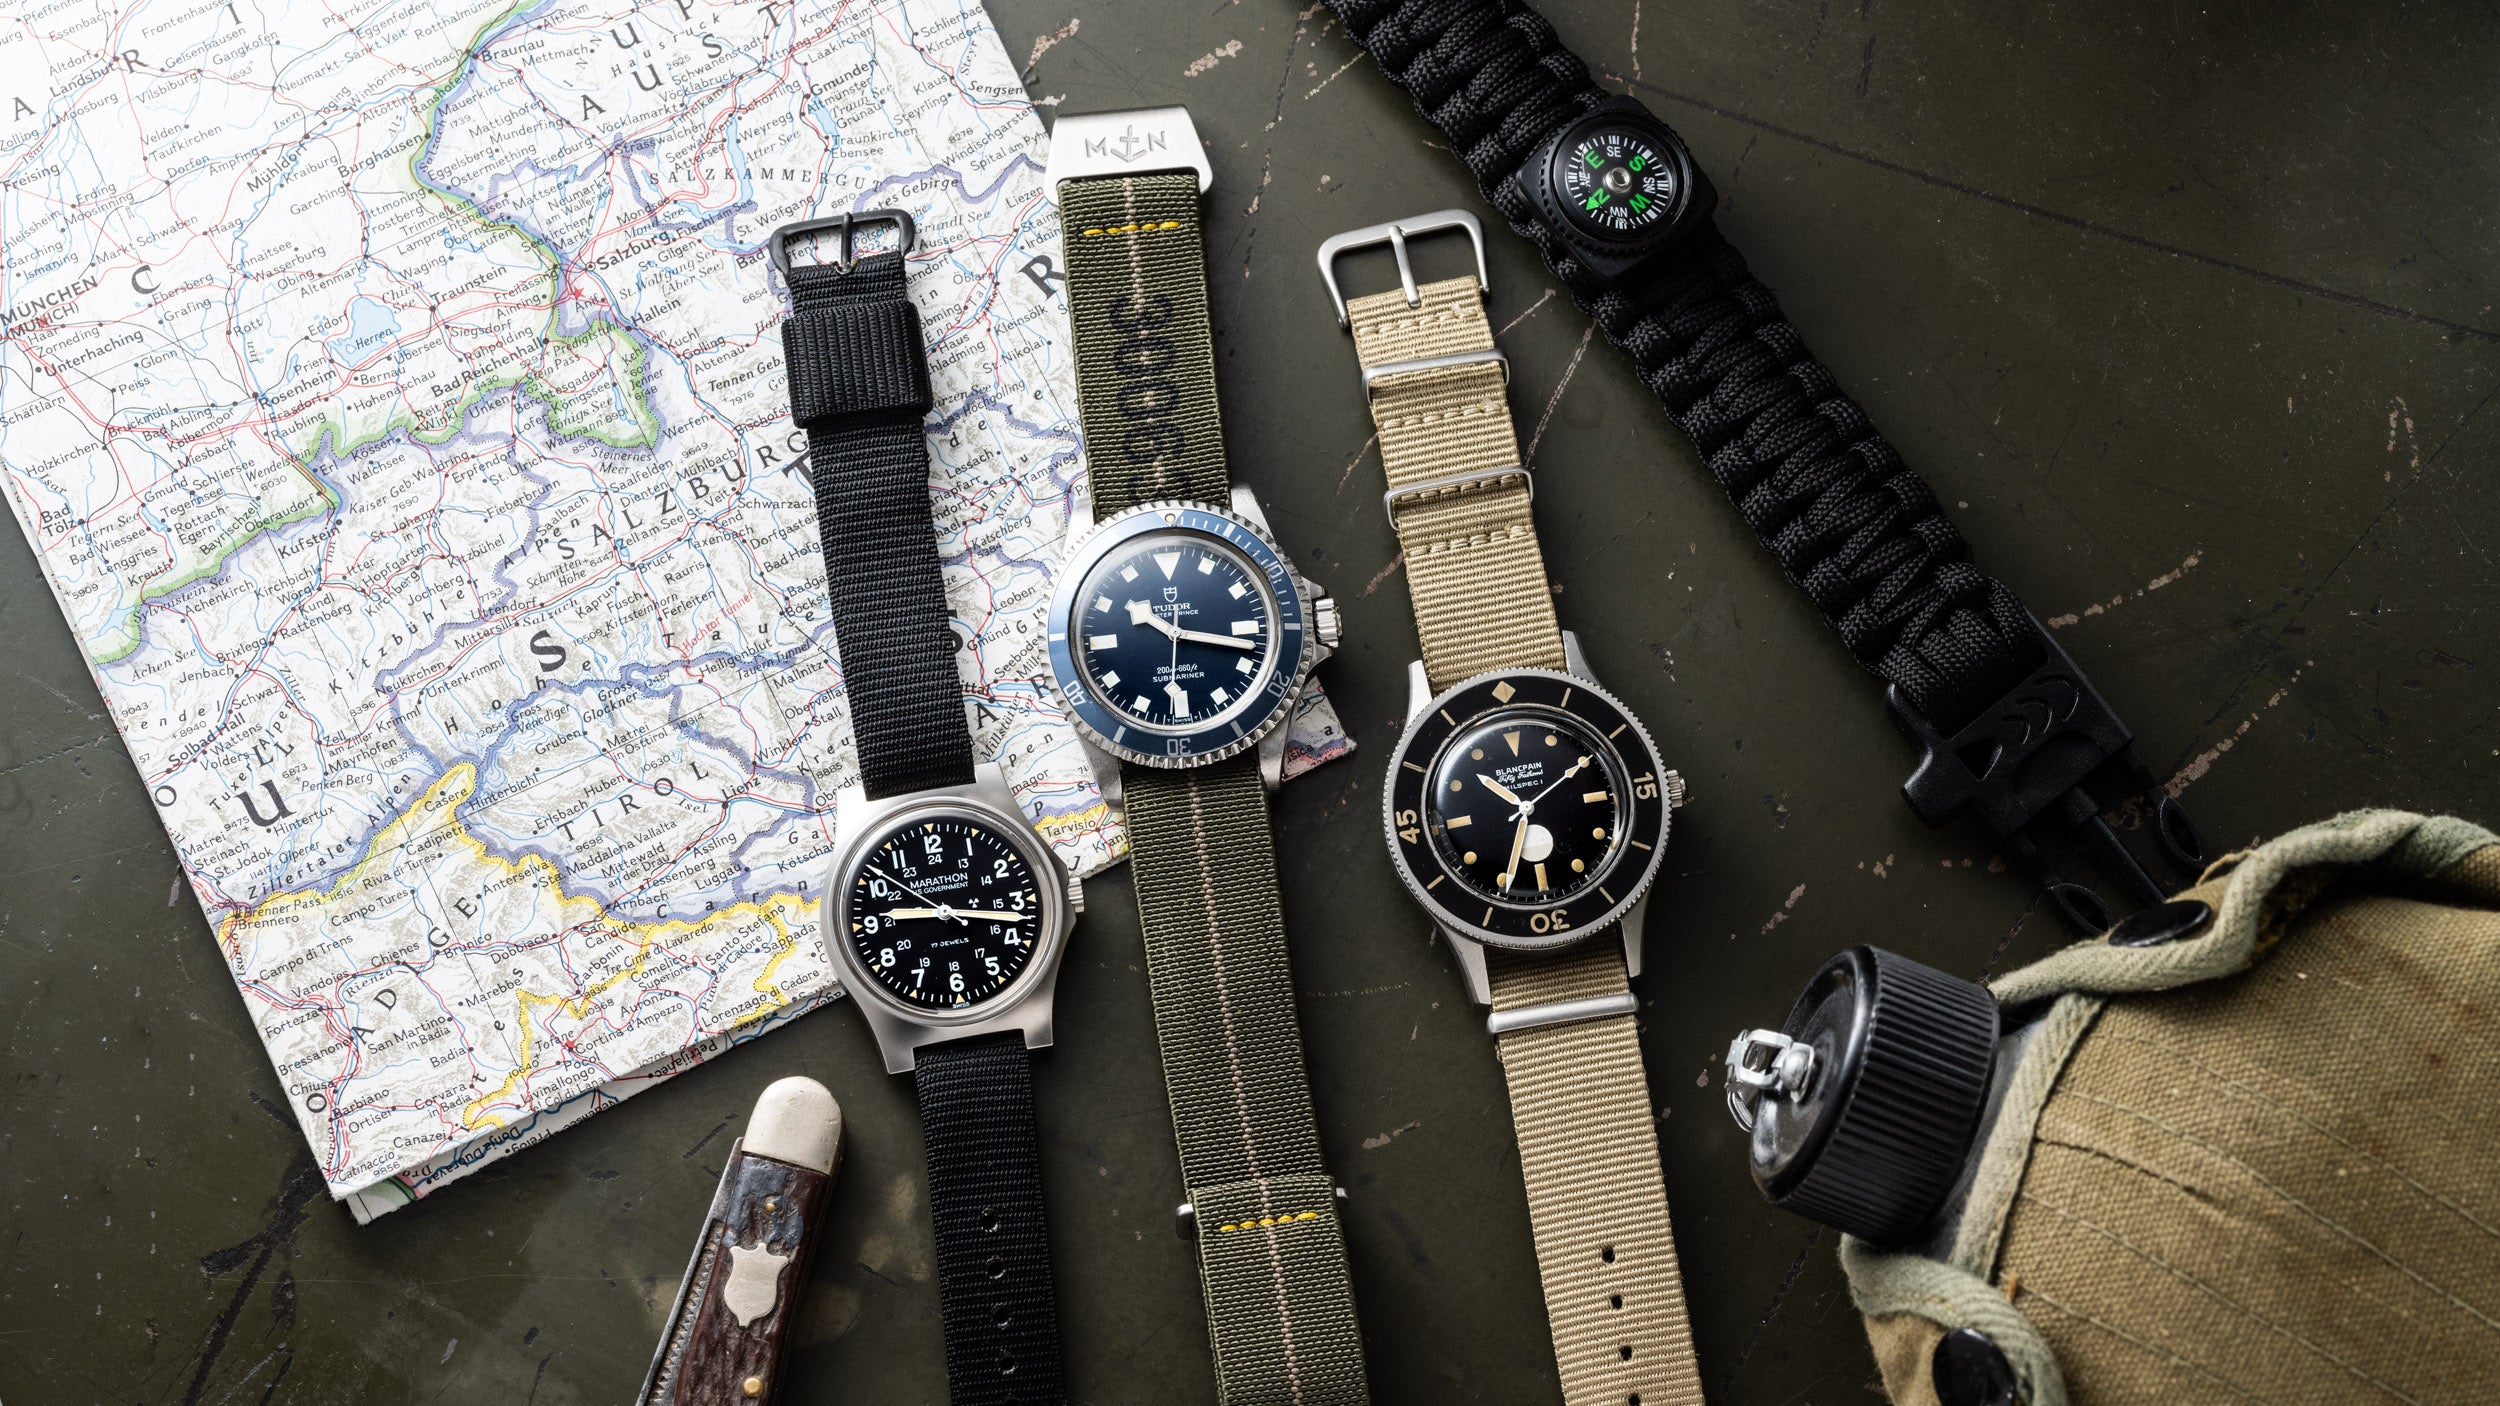 The Ultimate Guide to Military Watches | Gear Patrol